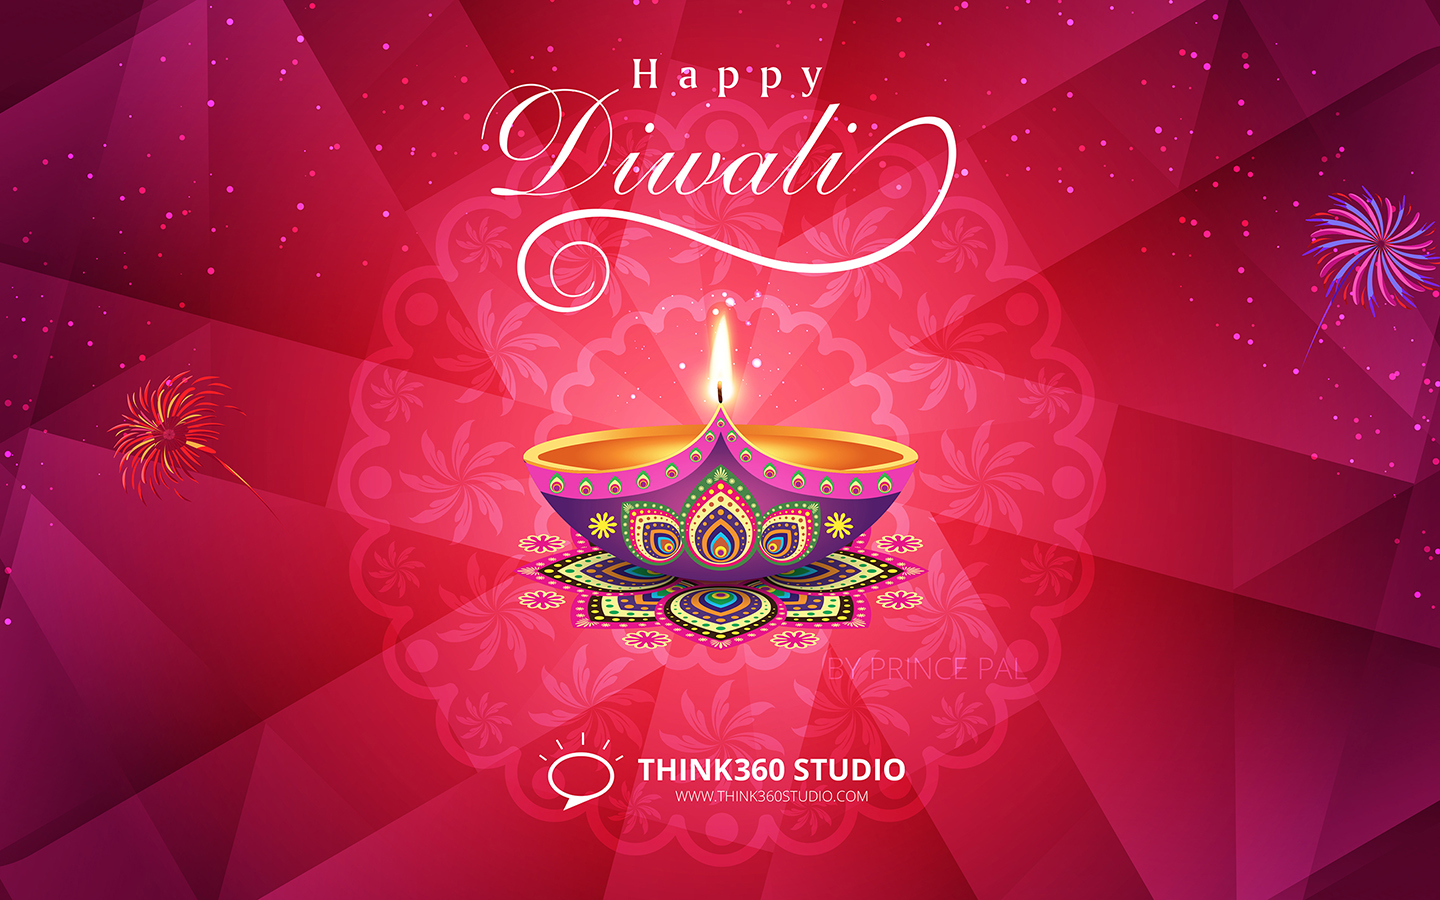 Free download Download Shubh Happy Diwali 2015 Wallpapers Free Dipawali  [800x600] for your Desktop, Mobile & Tablet | Explore 98+ Diwali Wallpapers  | HD Wallpapers Happy Diwali, Diwali Gift Wallpaper, Diwali Background